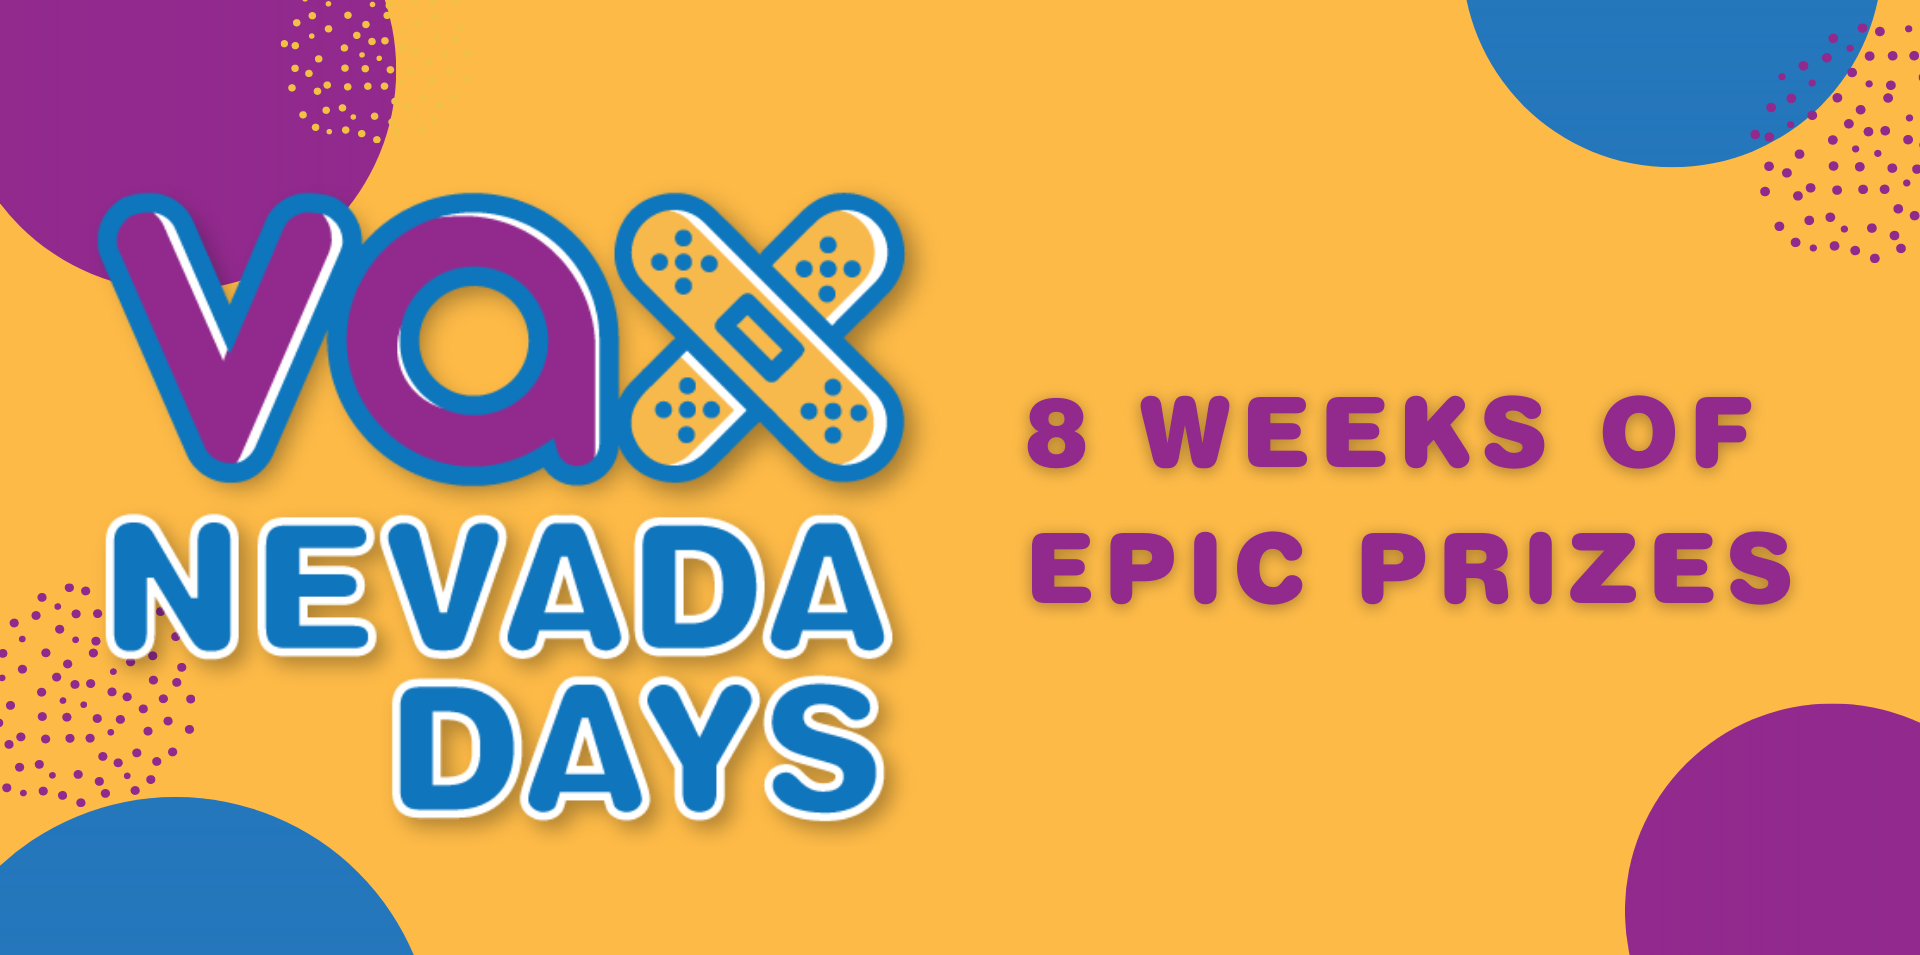 Vax Nevada Days header image. Yellow background with text that reads Vax Nevada Days eight weeks of epic prizes